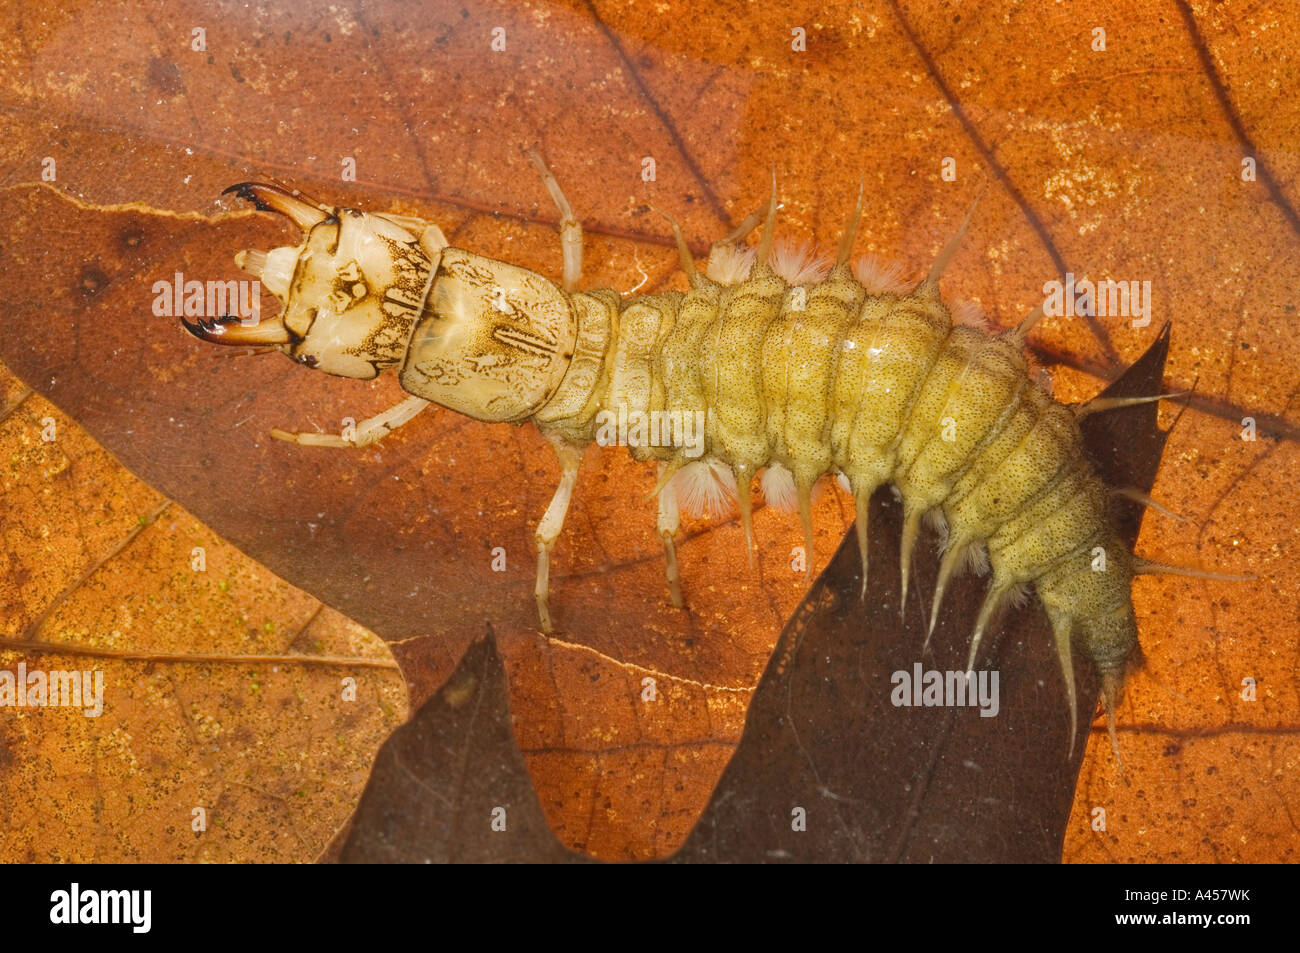 A hellgrammite, Dobsonfly larvae, Corydalus sp. swimming over dead